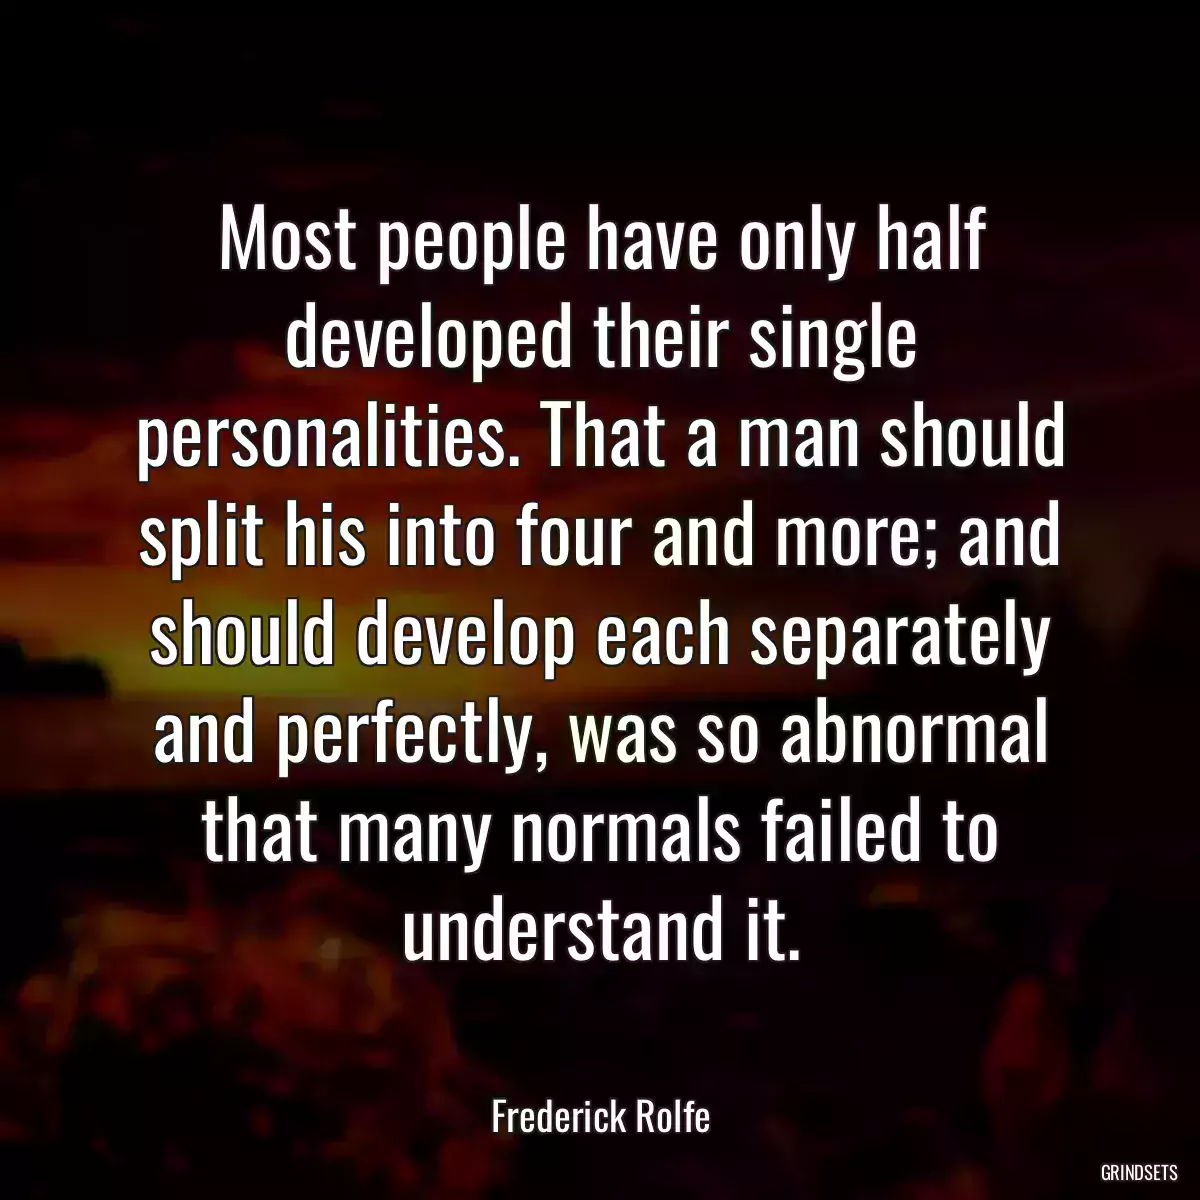 Most people have only half developed their single personalities. That a man should split his into four and more; and should develop each separately and perfectly, was so abnormal that many normals failed to understand it.